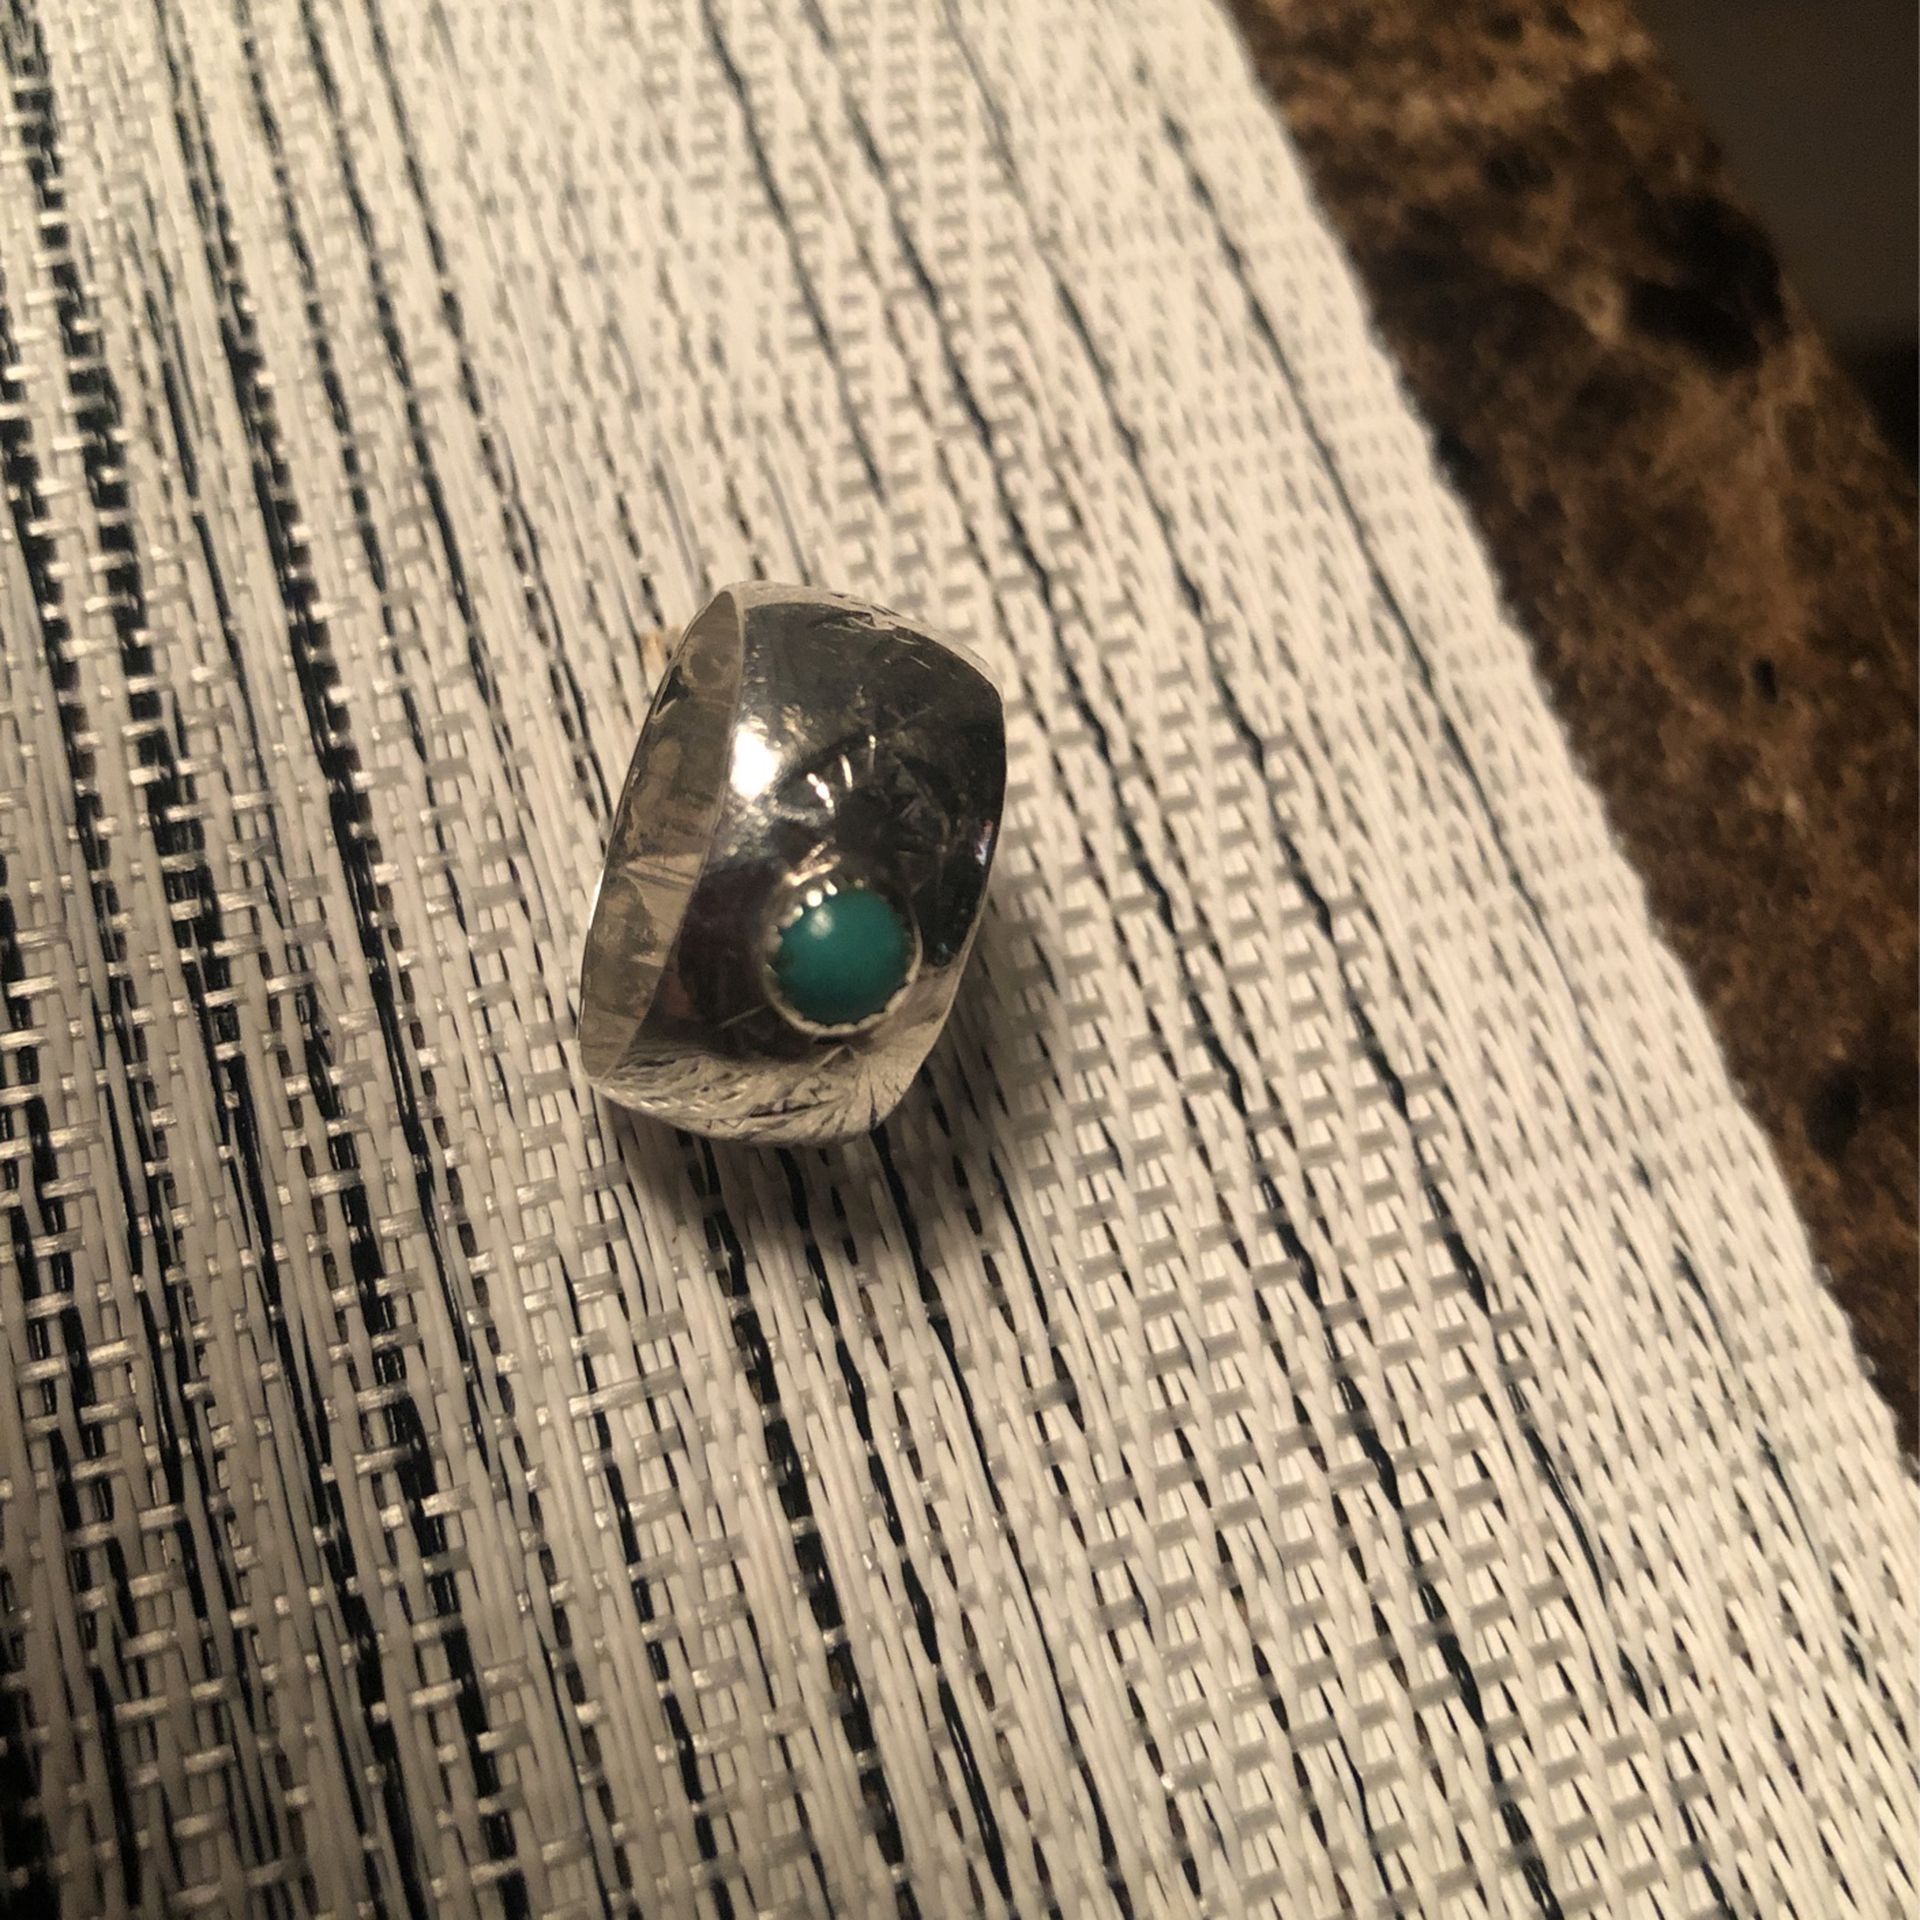 Silver Ring Lost , With Small Turquoise Stone